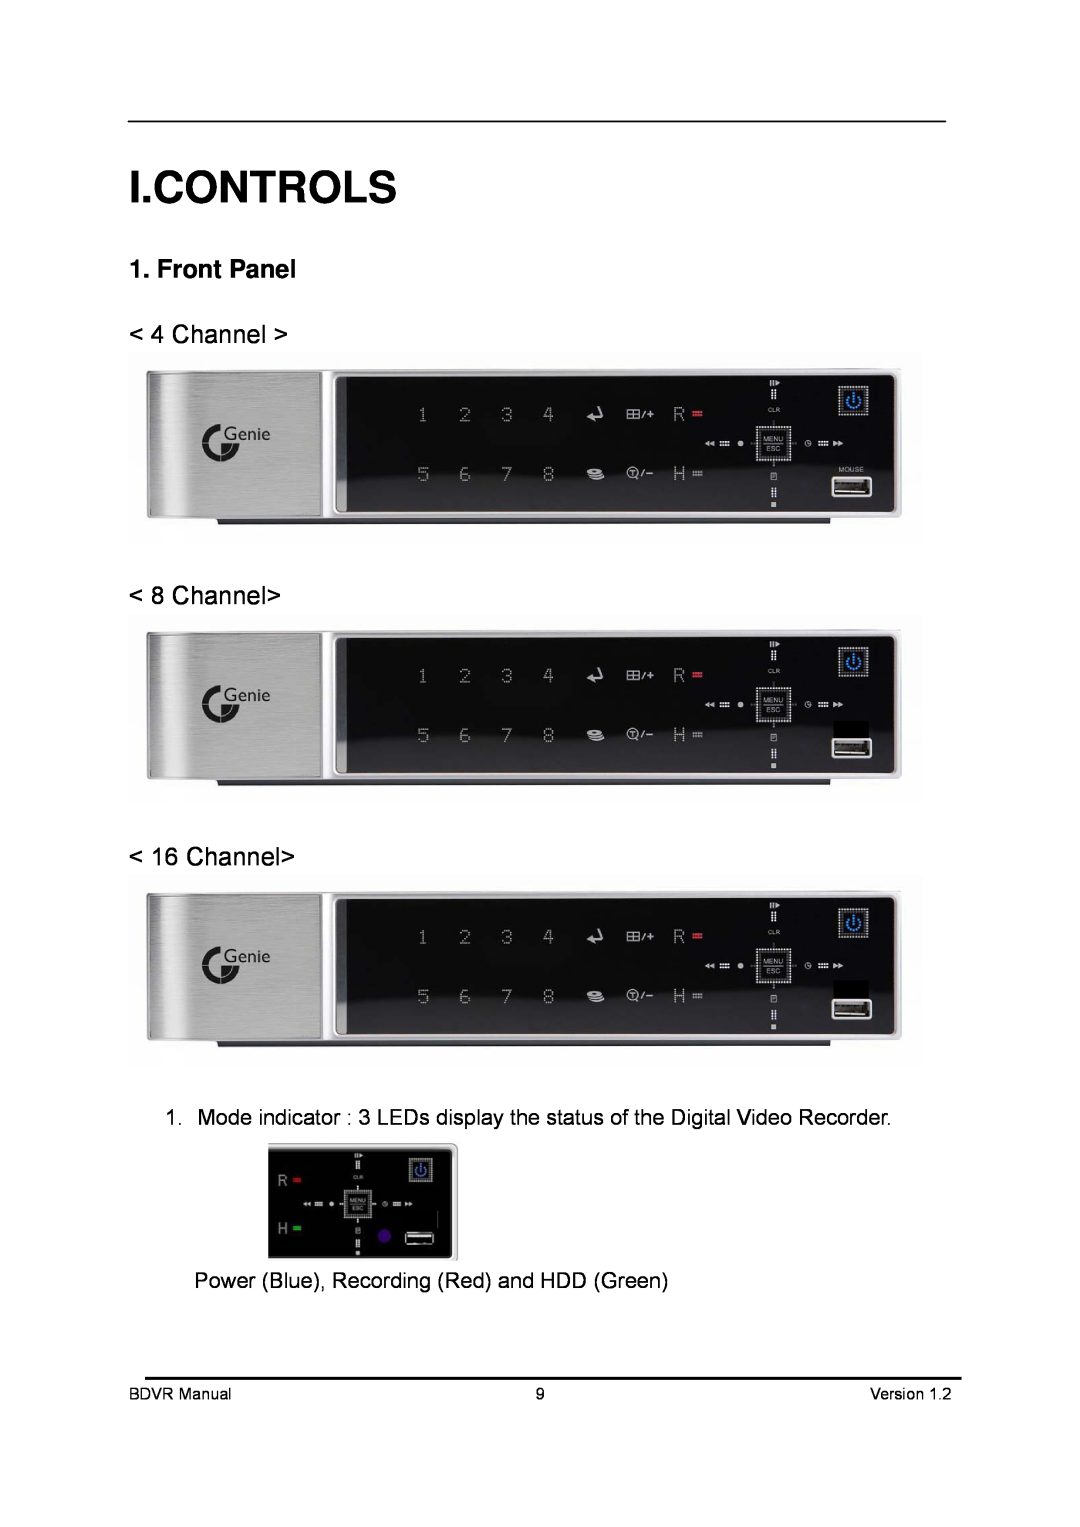 Genie BDVR-16, BDVR-8 manual I.Controls, Front Panel, Channel 8 Channel 16 Channel, Power Blue, Recording Red and HDD Green 